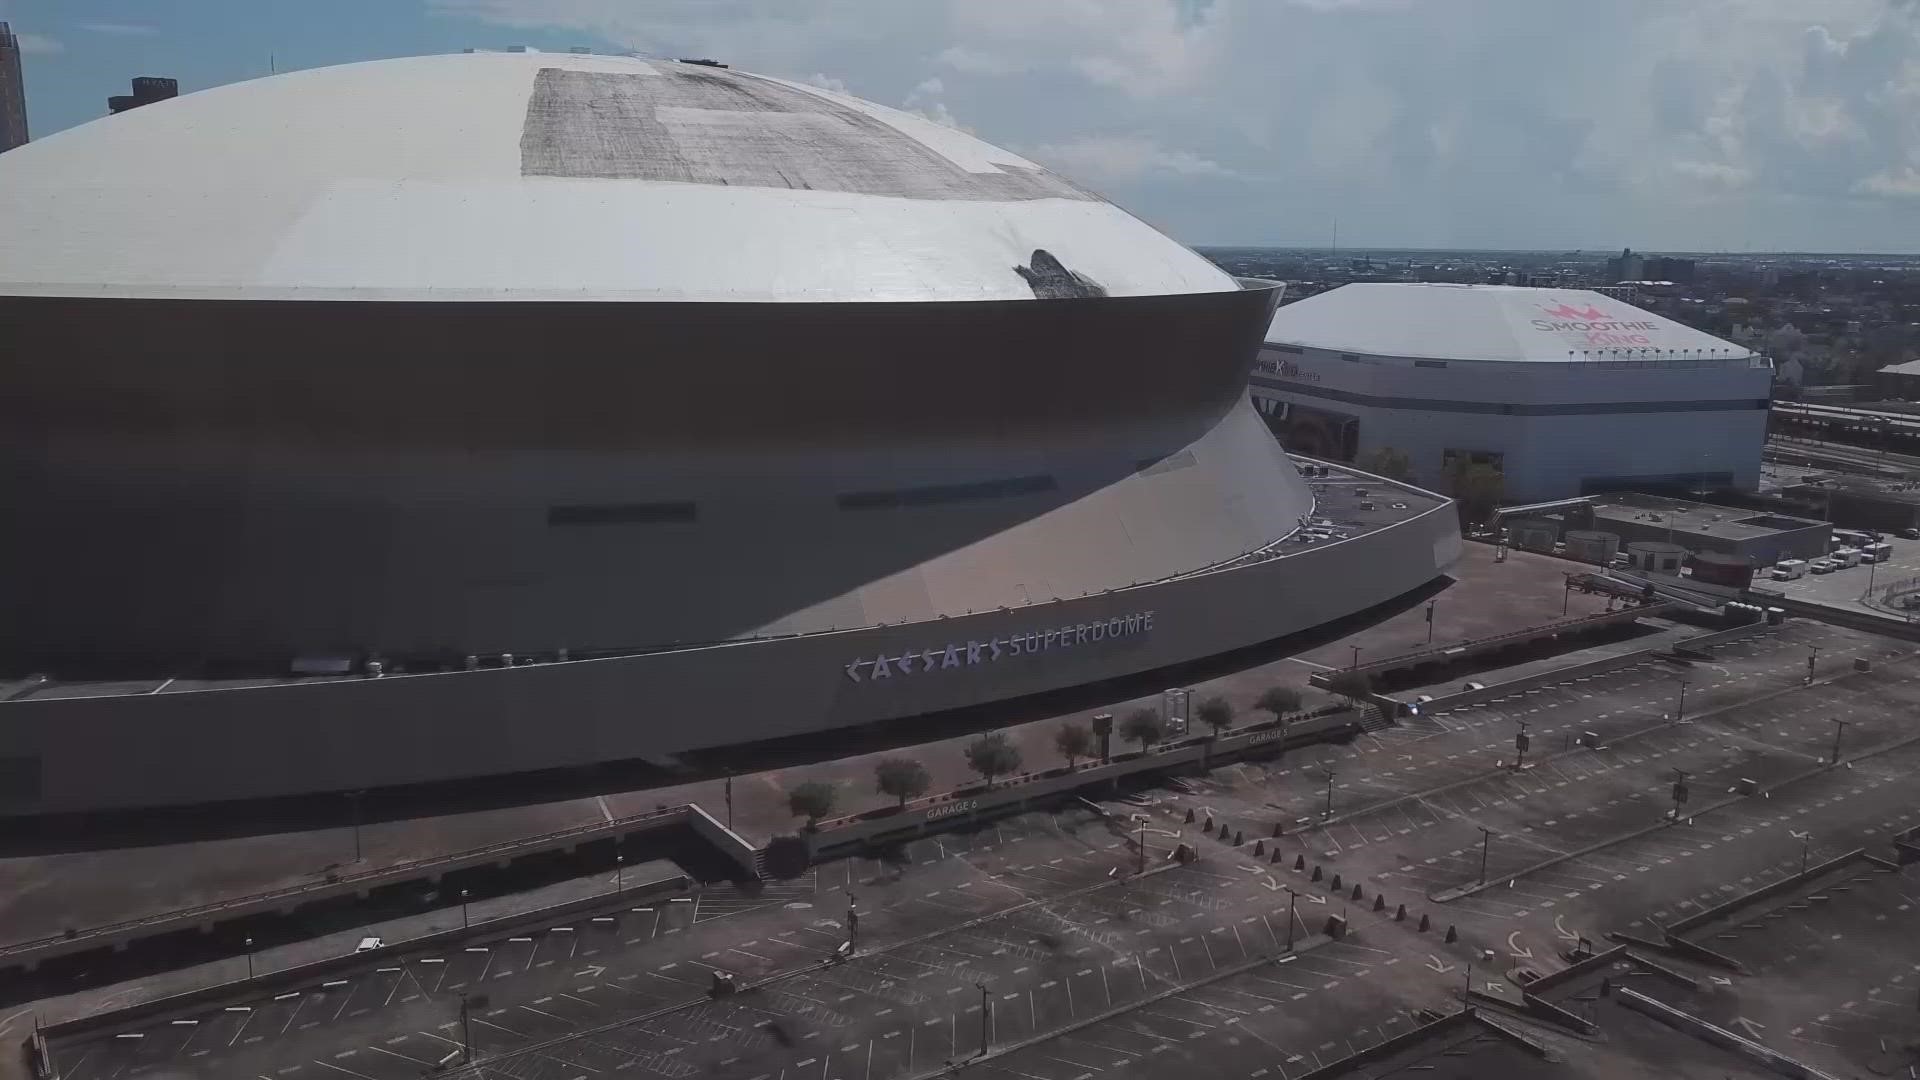 Drone video shows where the Superdome roof caught fire Tuesday afternoon.